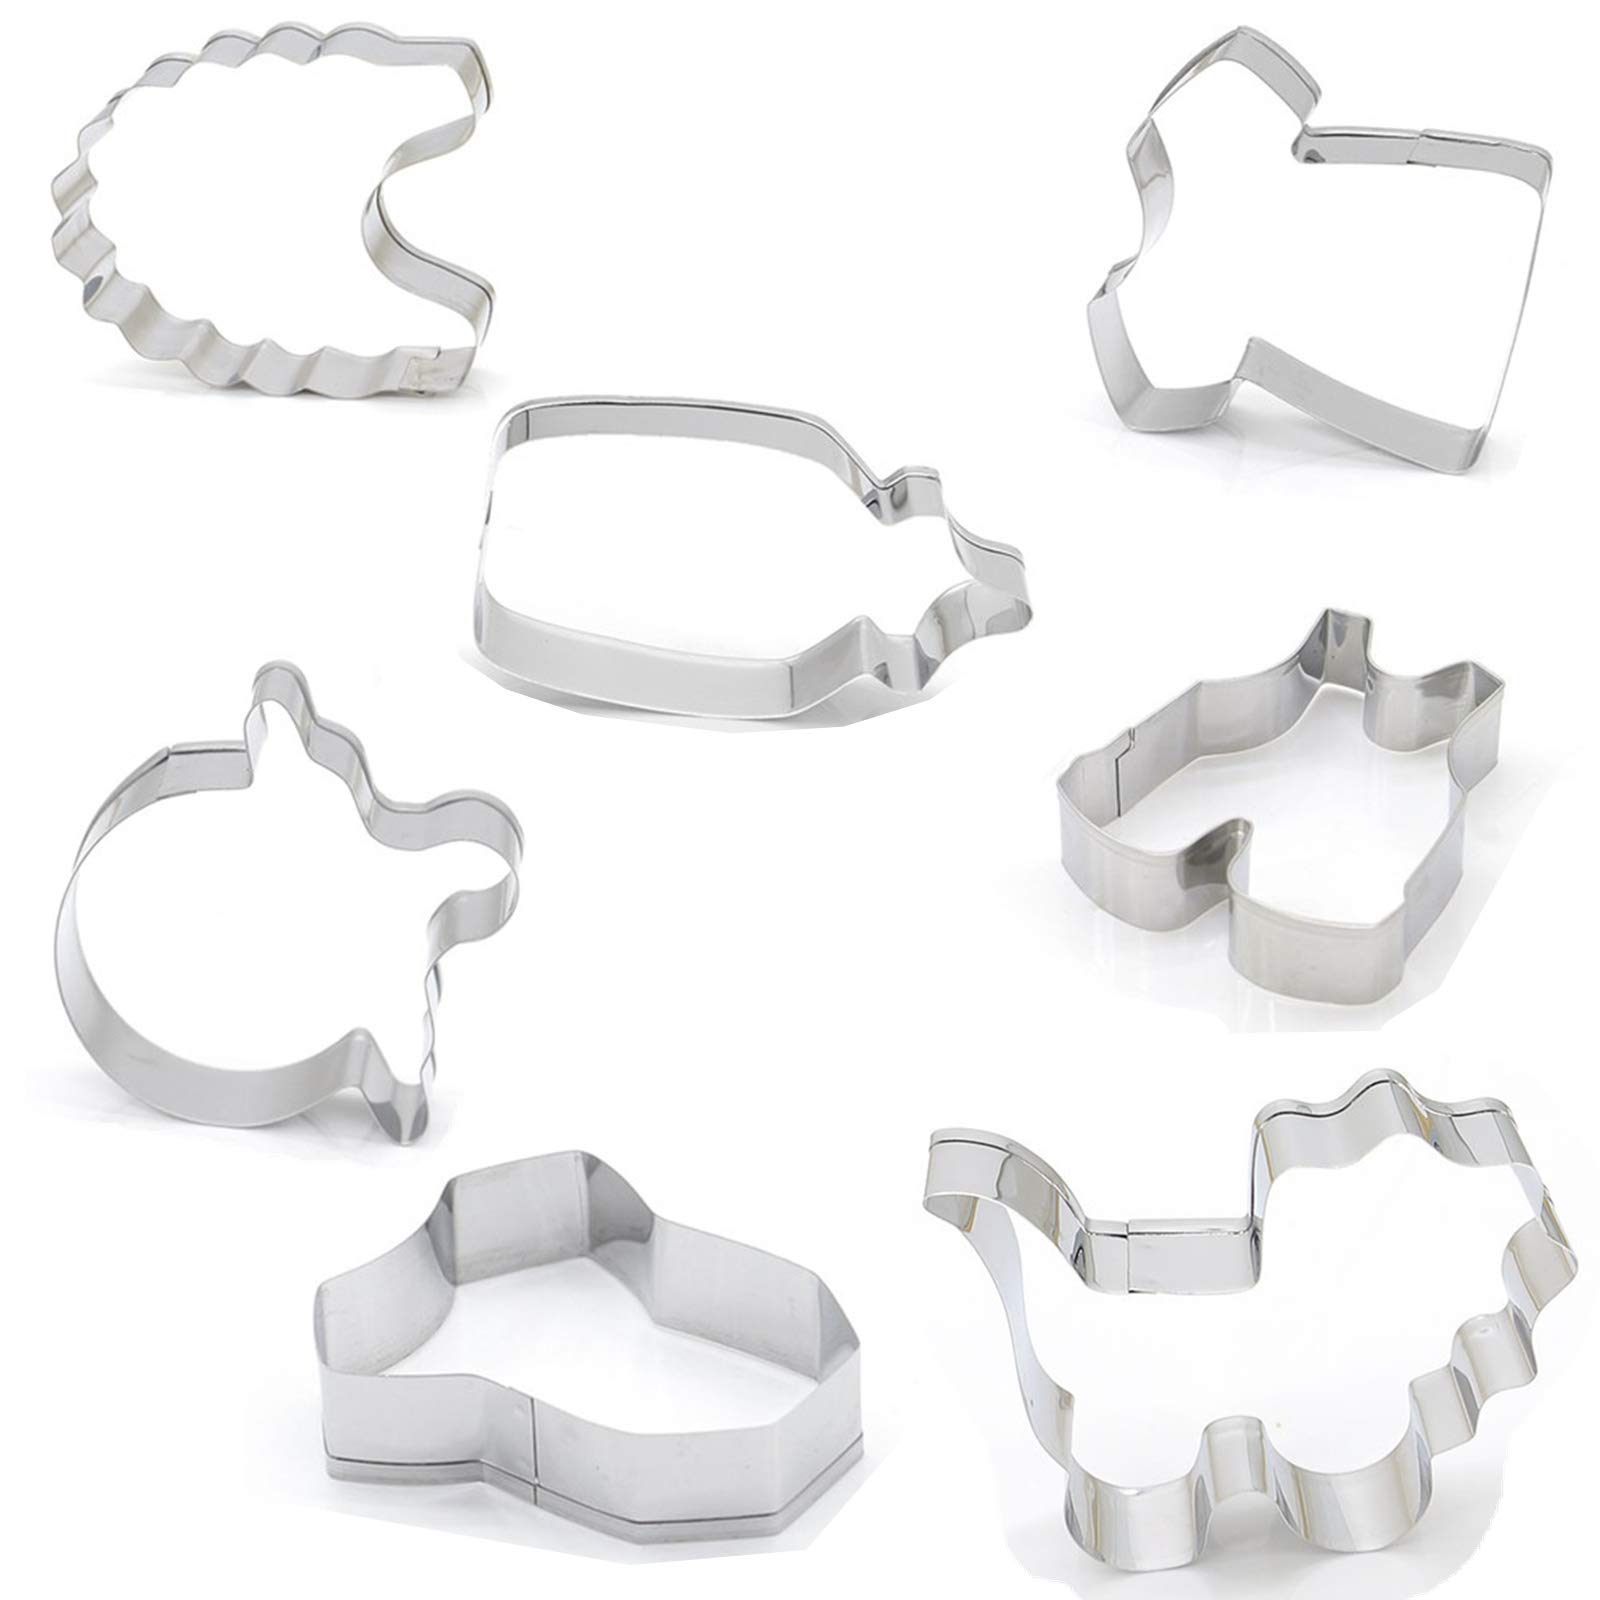  Baby Shower Series Cookie Cutters Set of 7 pcs, Stainless Steel Fondant Cutter Molds Baking DIY